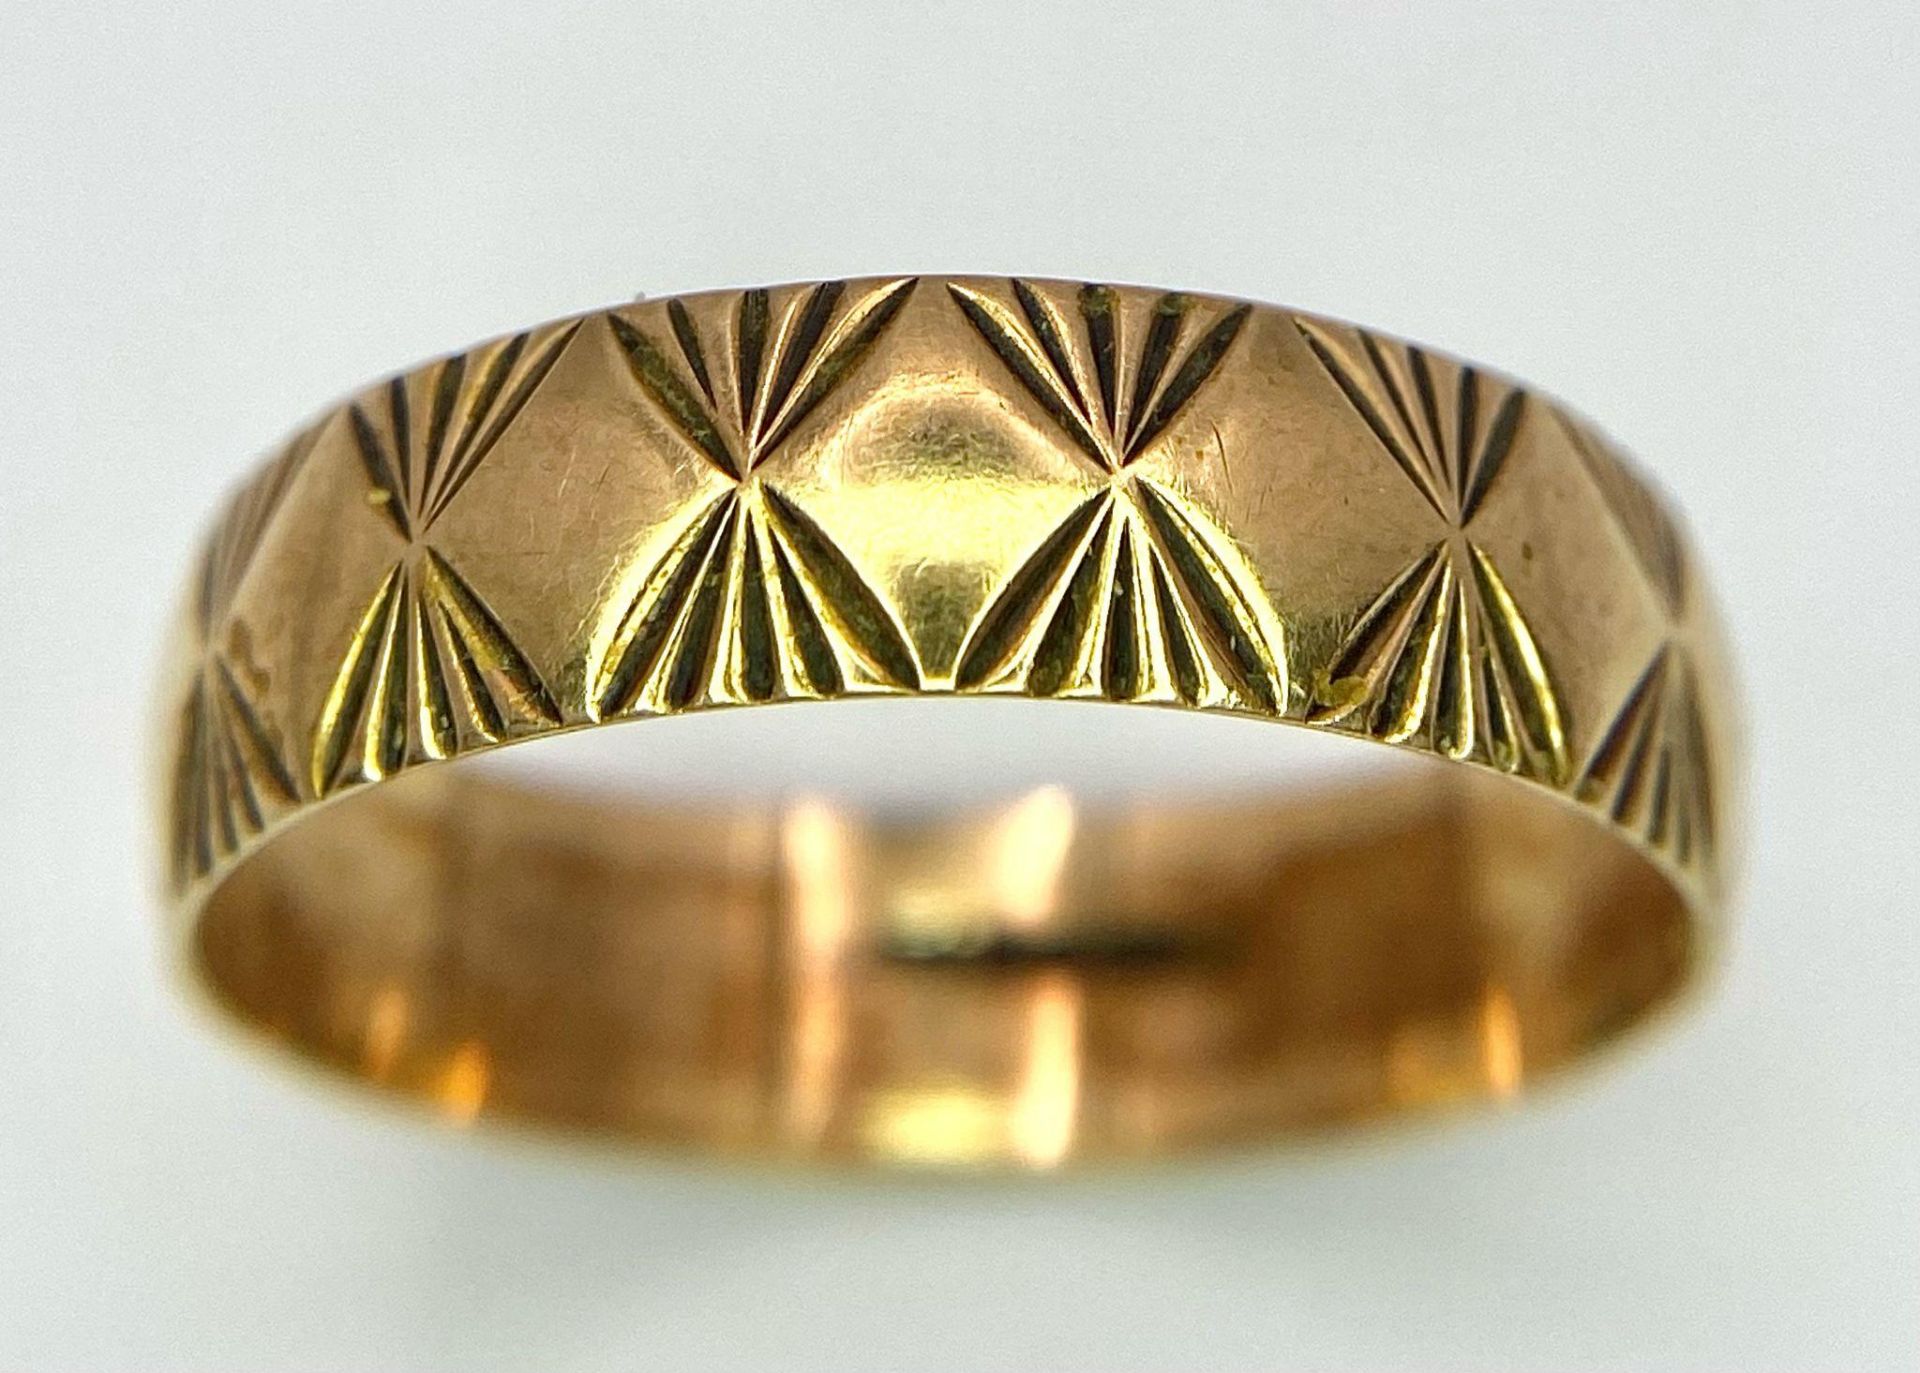 A Vintage 9K Yellow Gold Band Ring with Geometric Pattern Decoration. 6mm width. Size R. 2.1g - Bild 3 aus 11